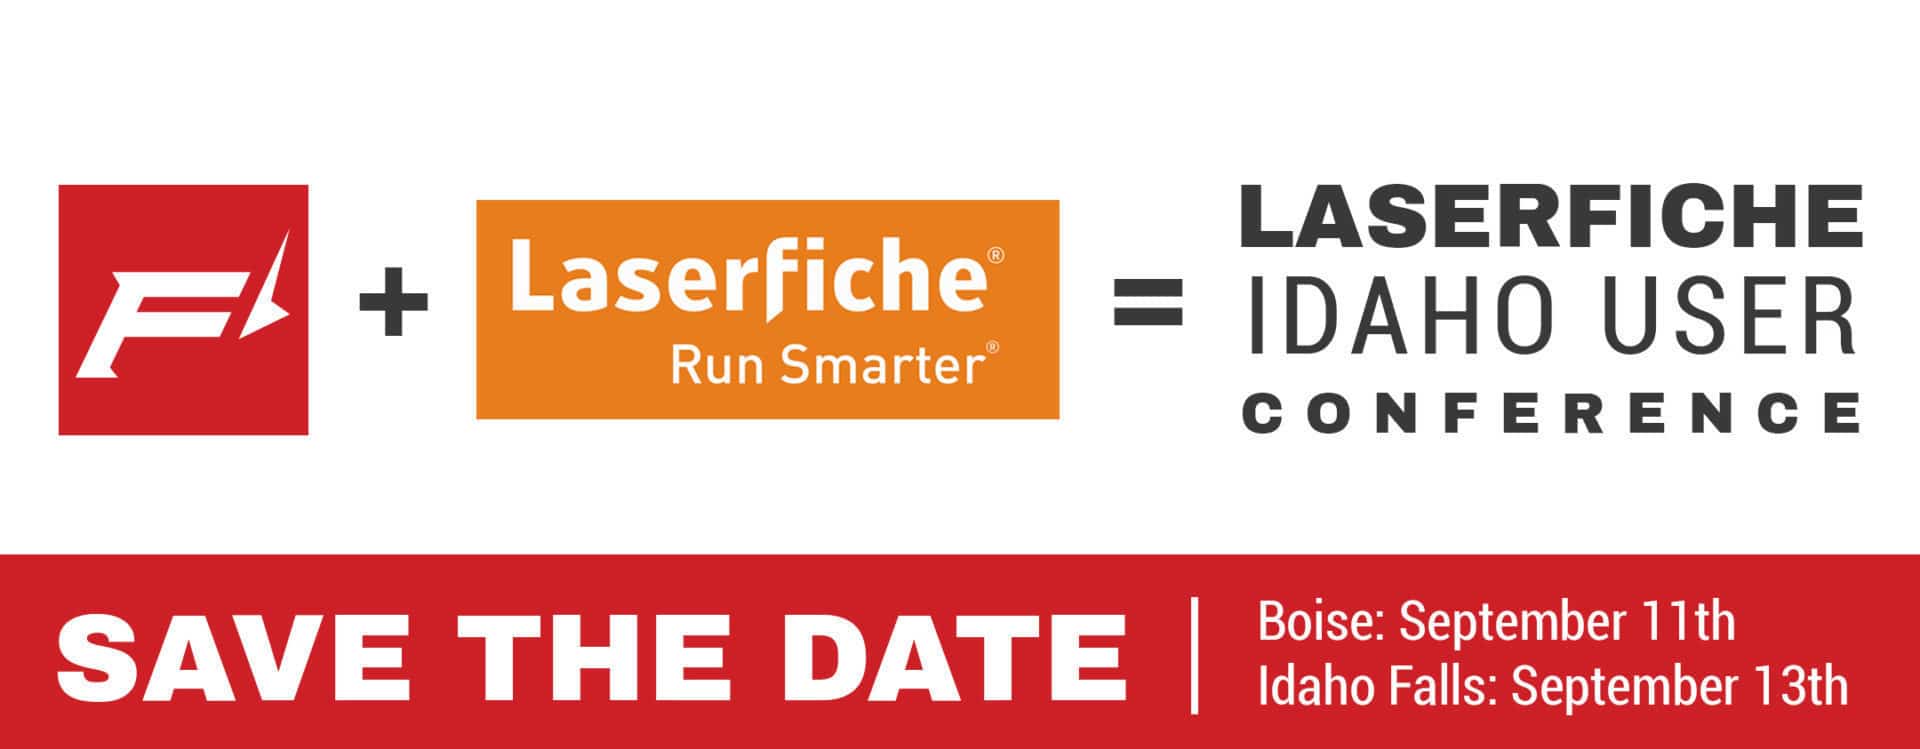 LaserFicheUserConference